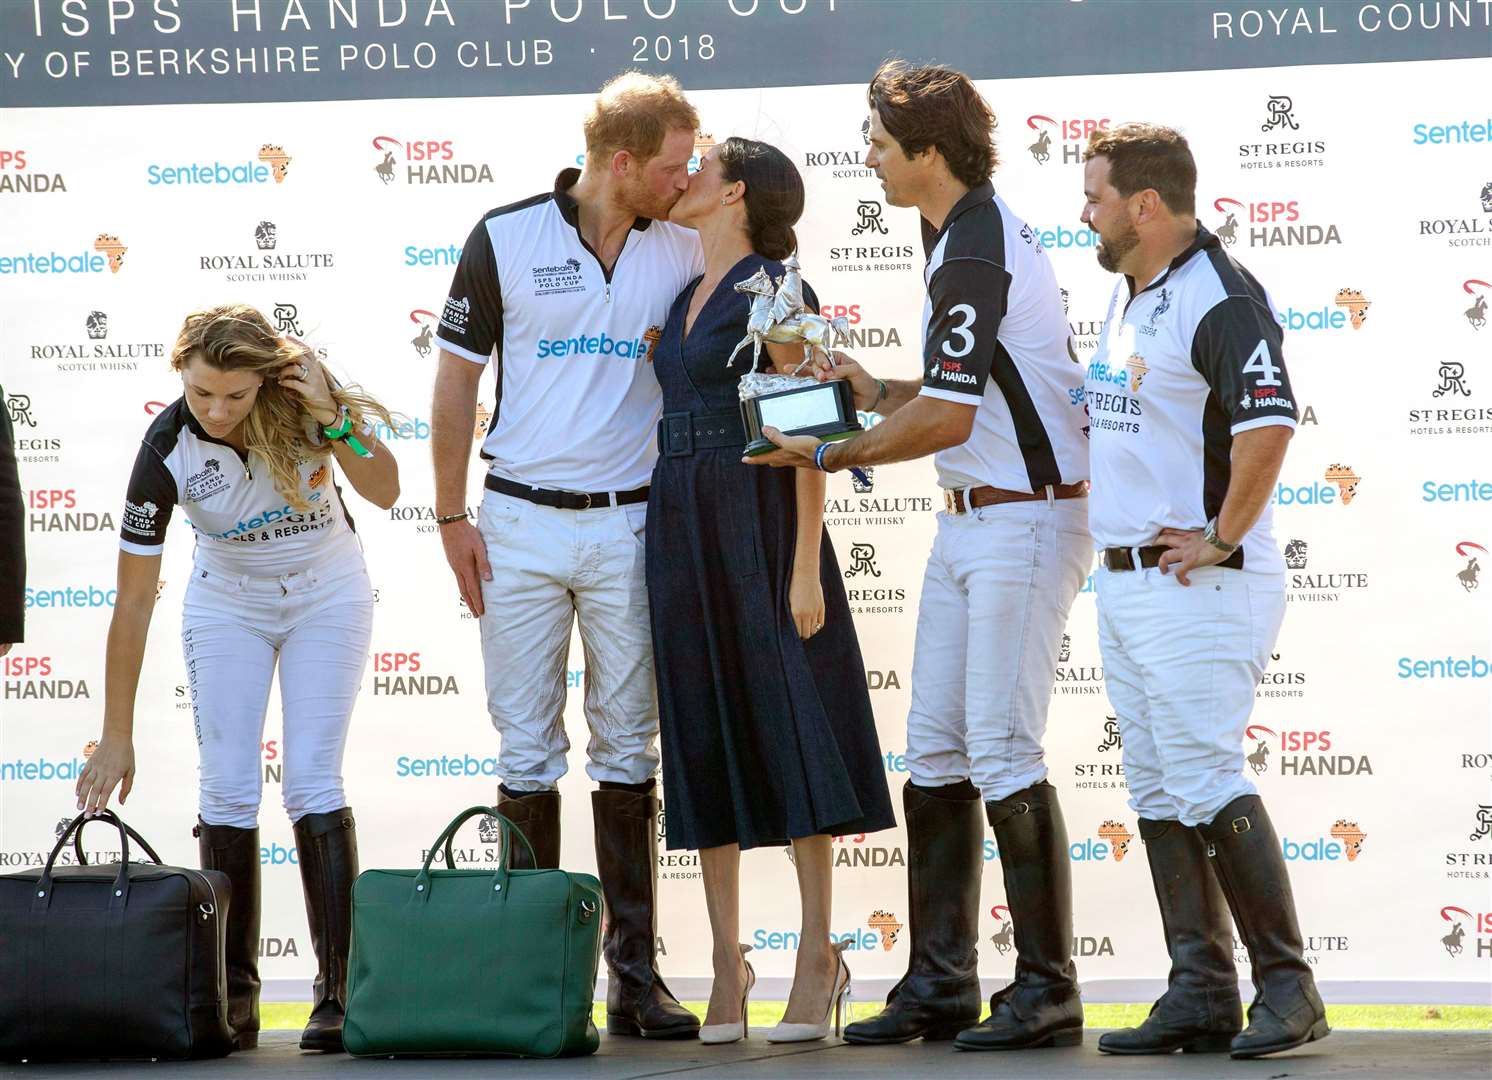 Harry and Meghan at a charity polo match (Steve Parsons/PA)